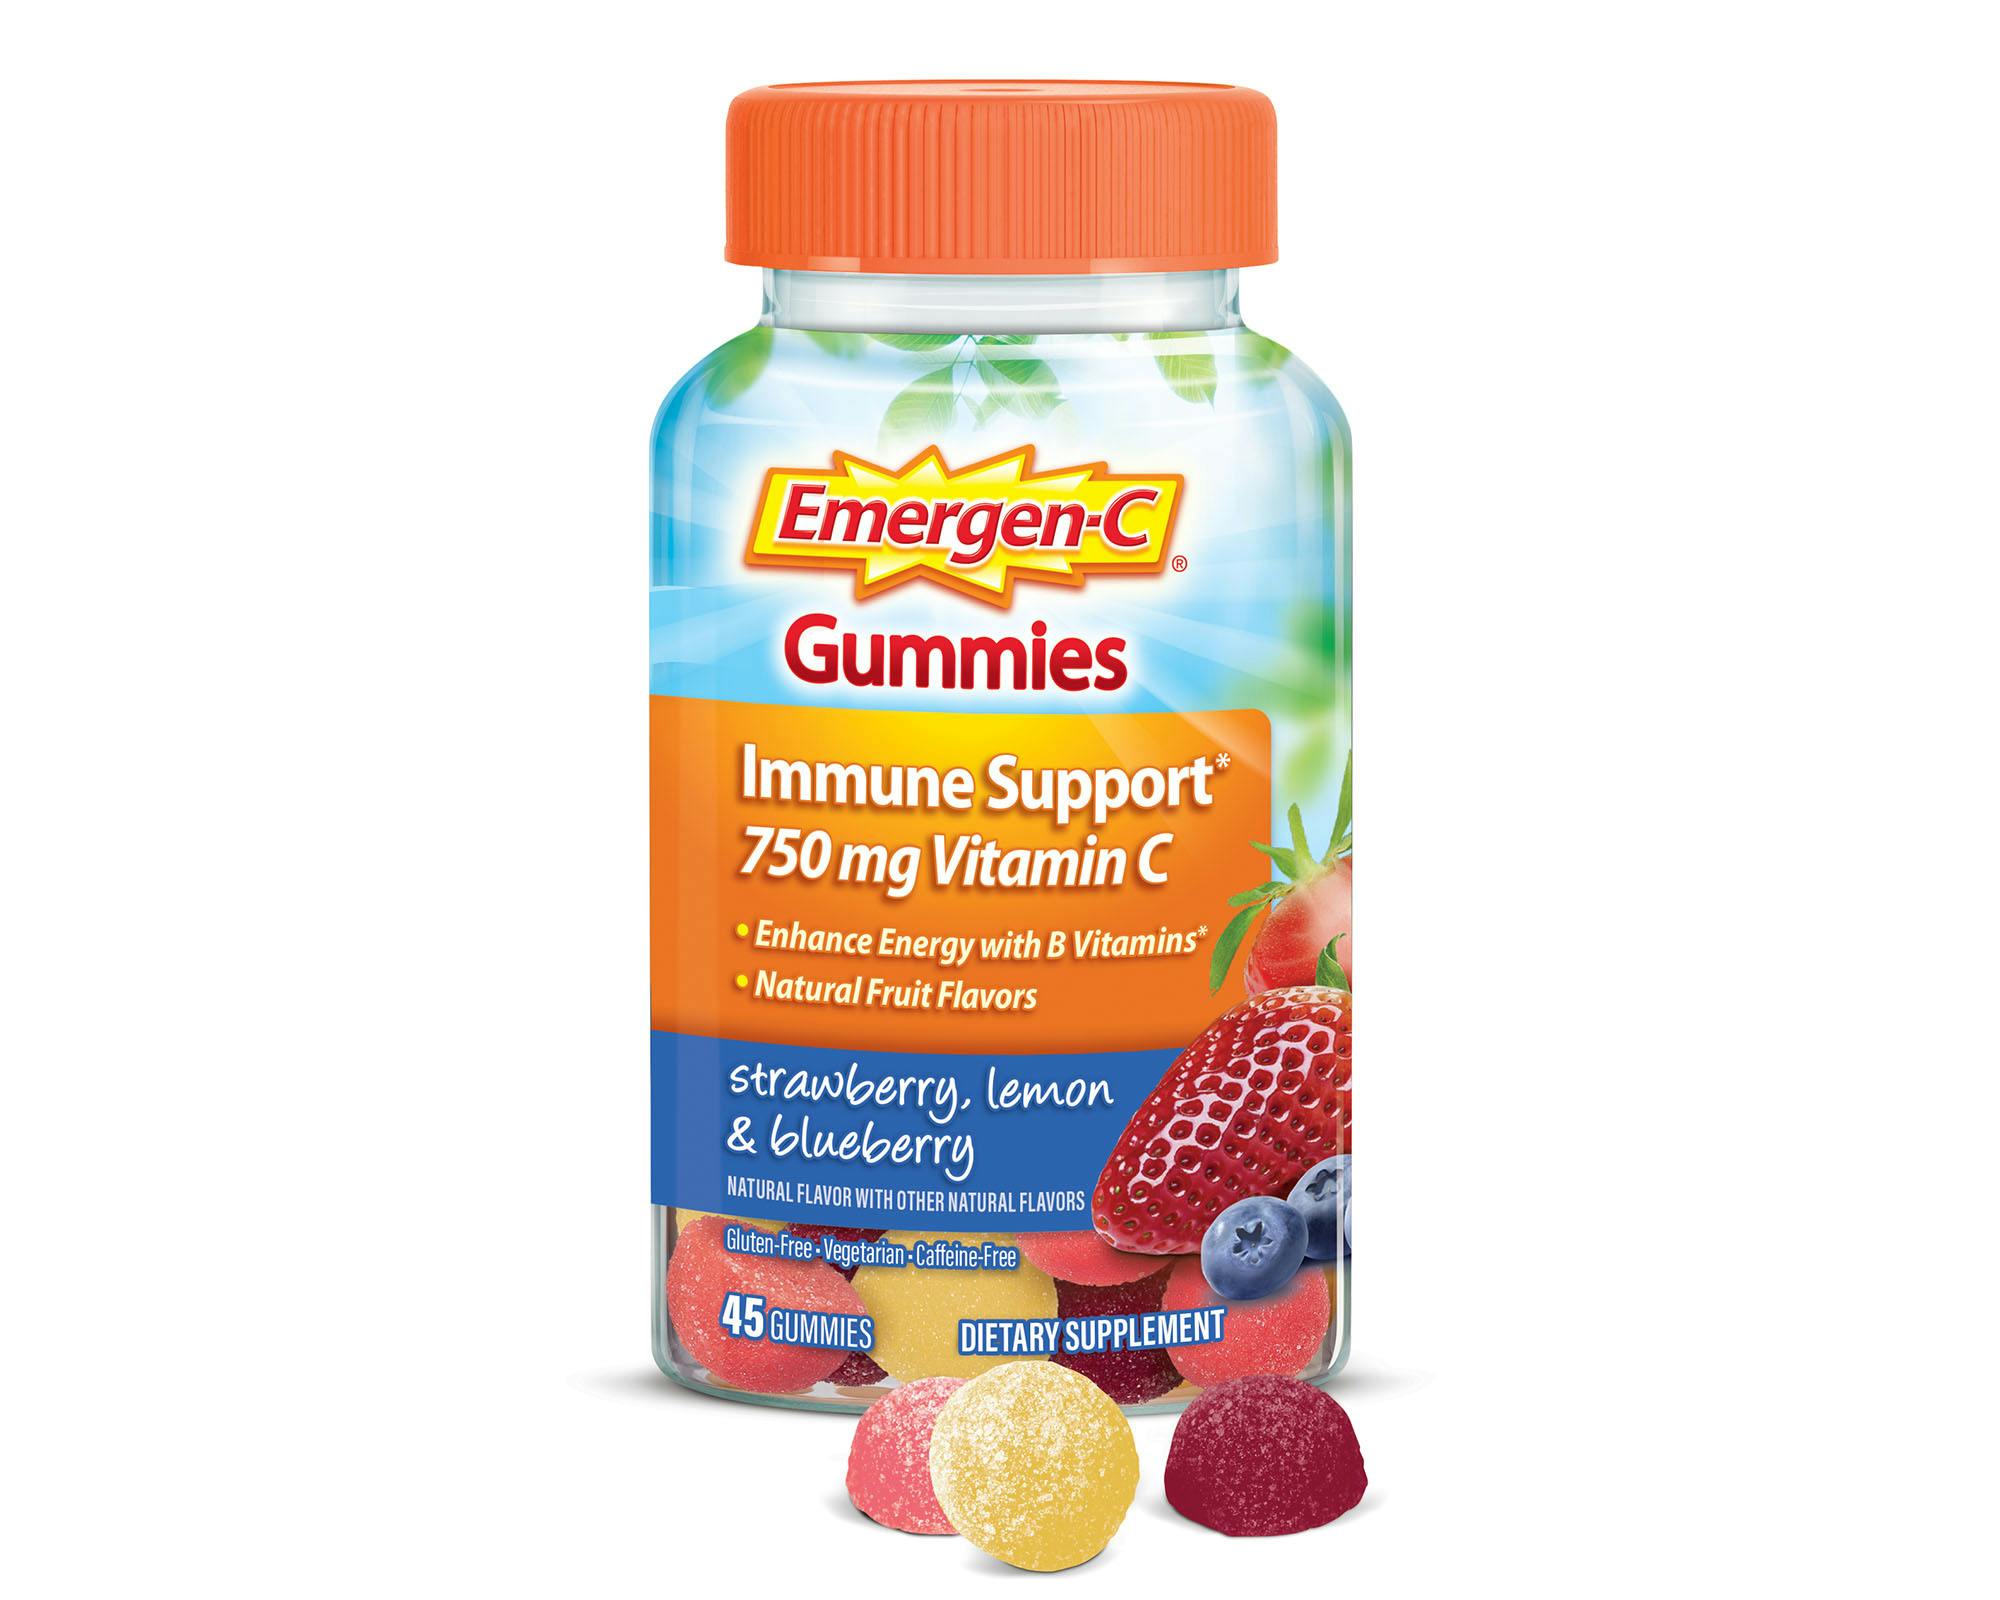 Strawberry, Lemon & Blueberry Immune Support Gummies bottle with gummies grouping